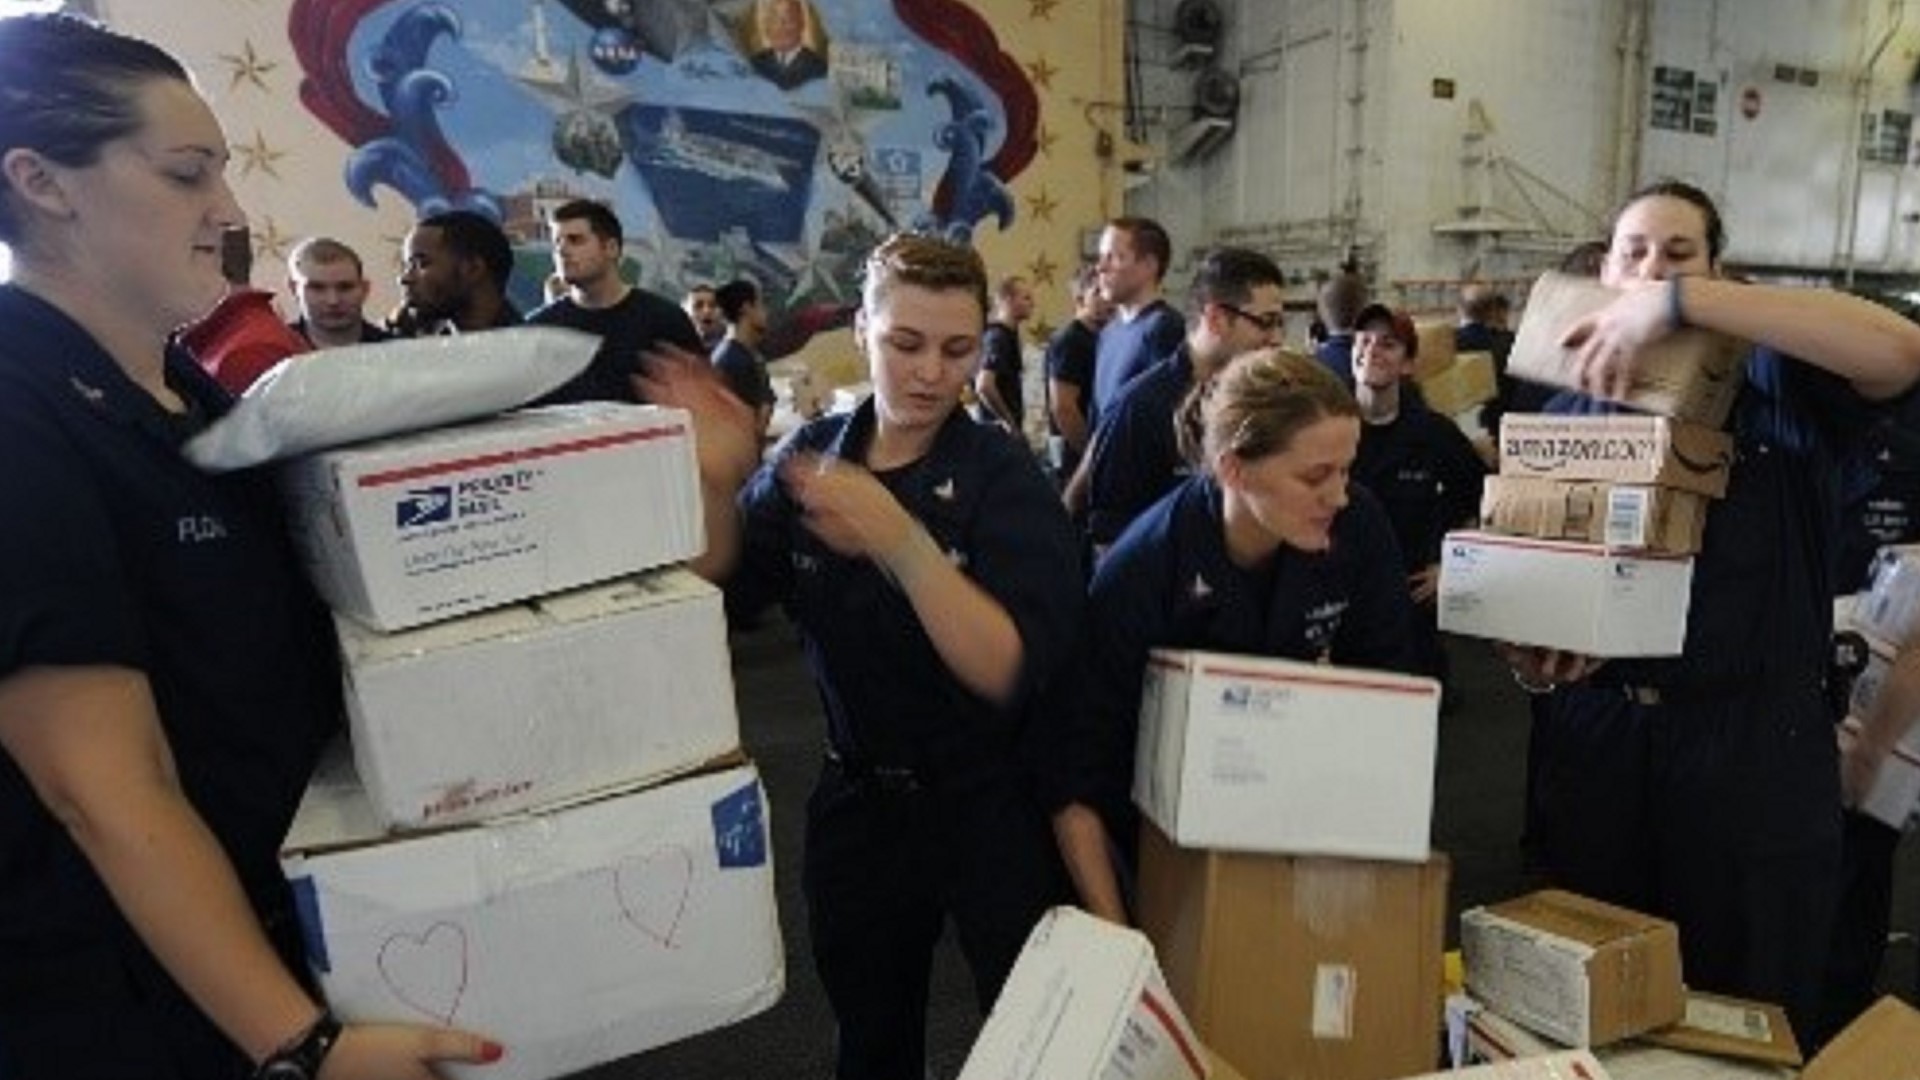 USPS mailing dates to military serving overseas